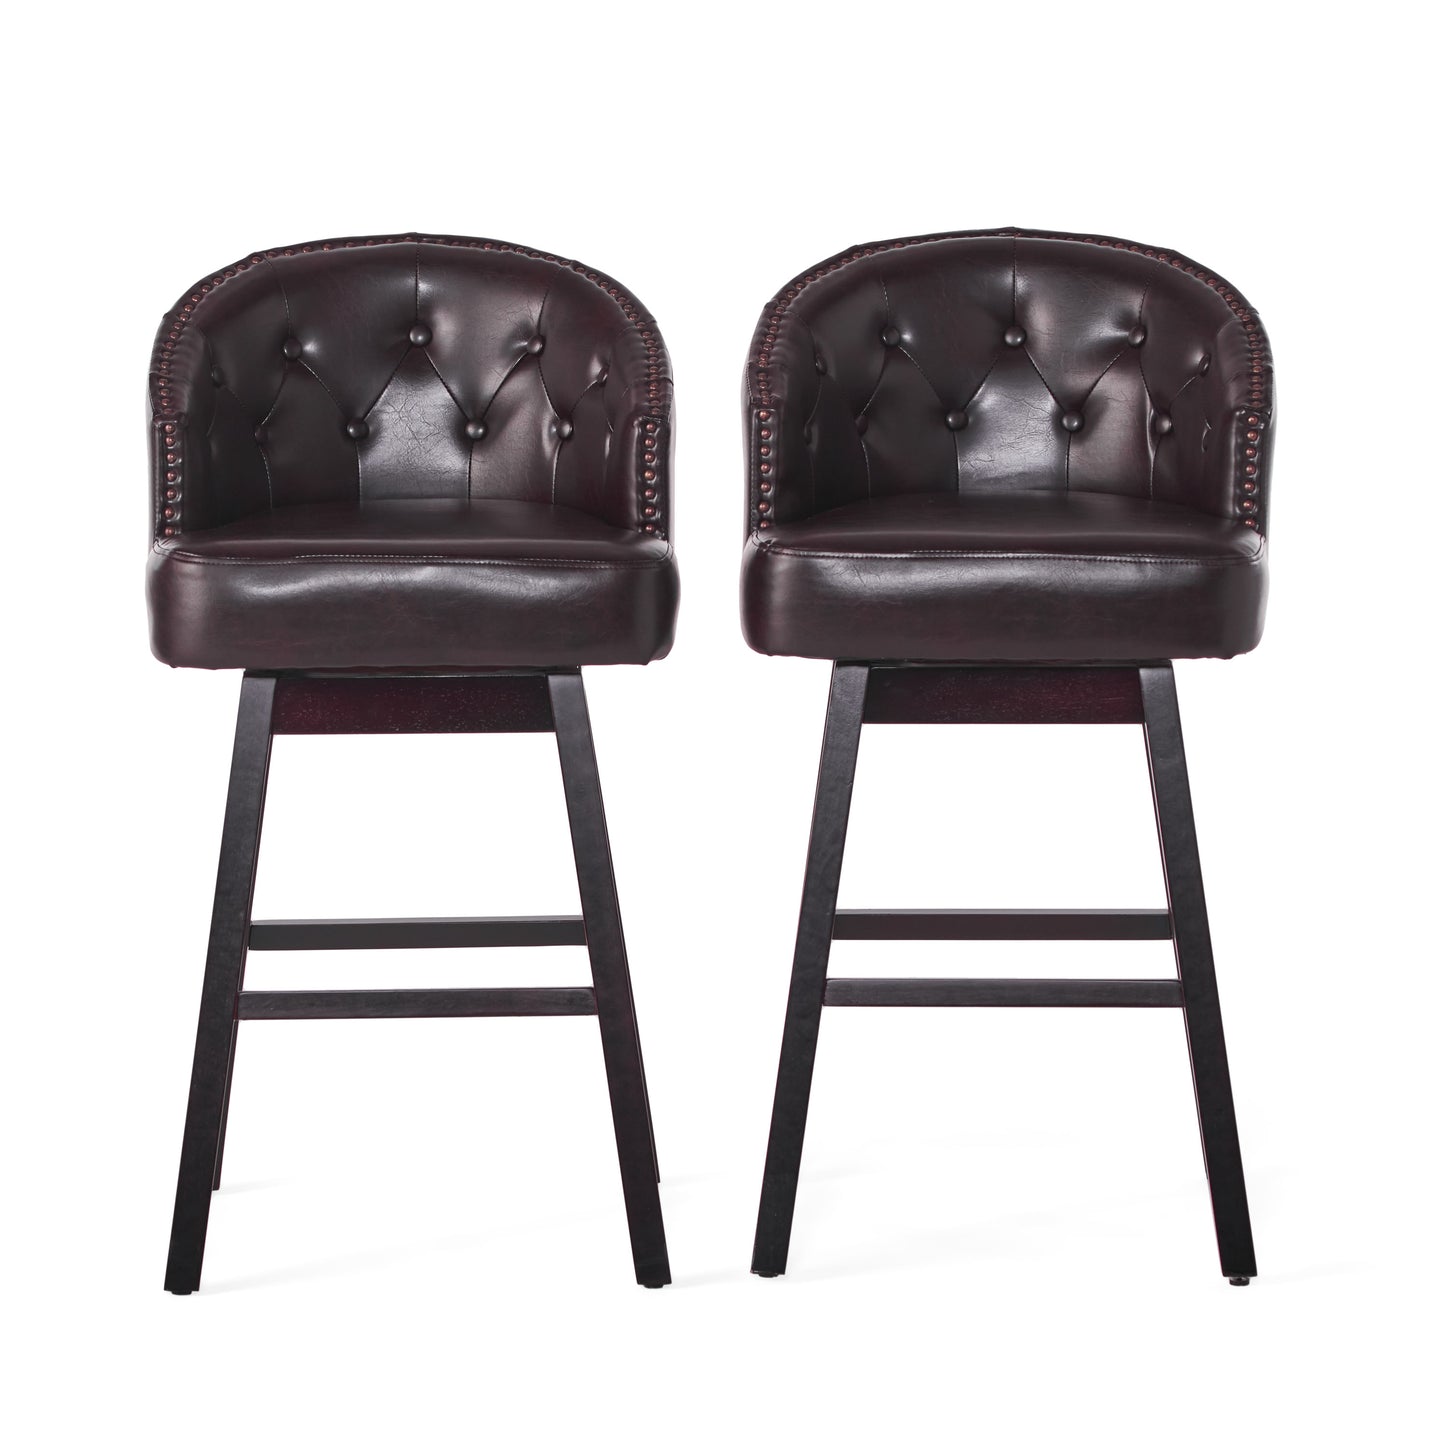 Westman 30-Inch Brown Leather Swivel Backed Barstool (Set of 2)